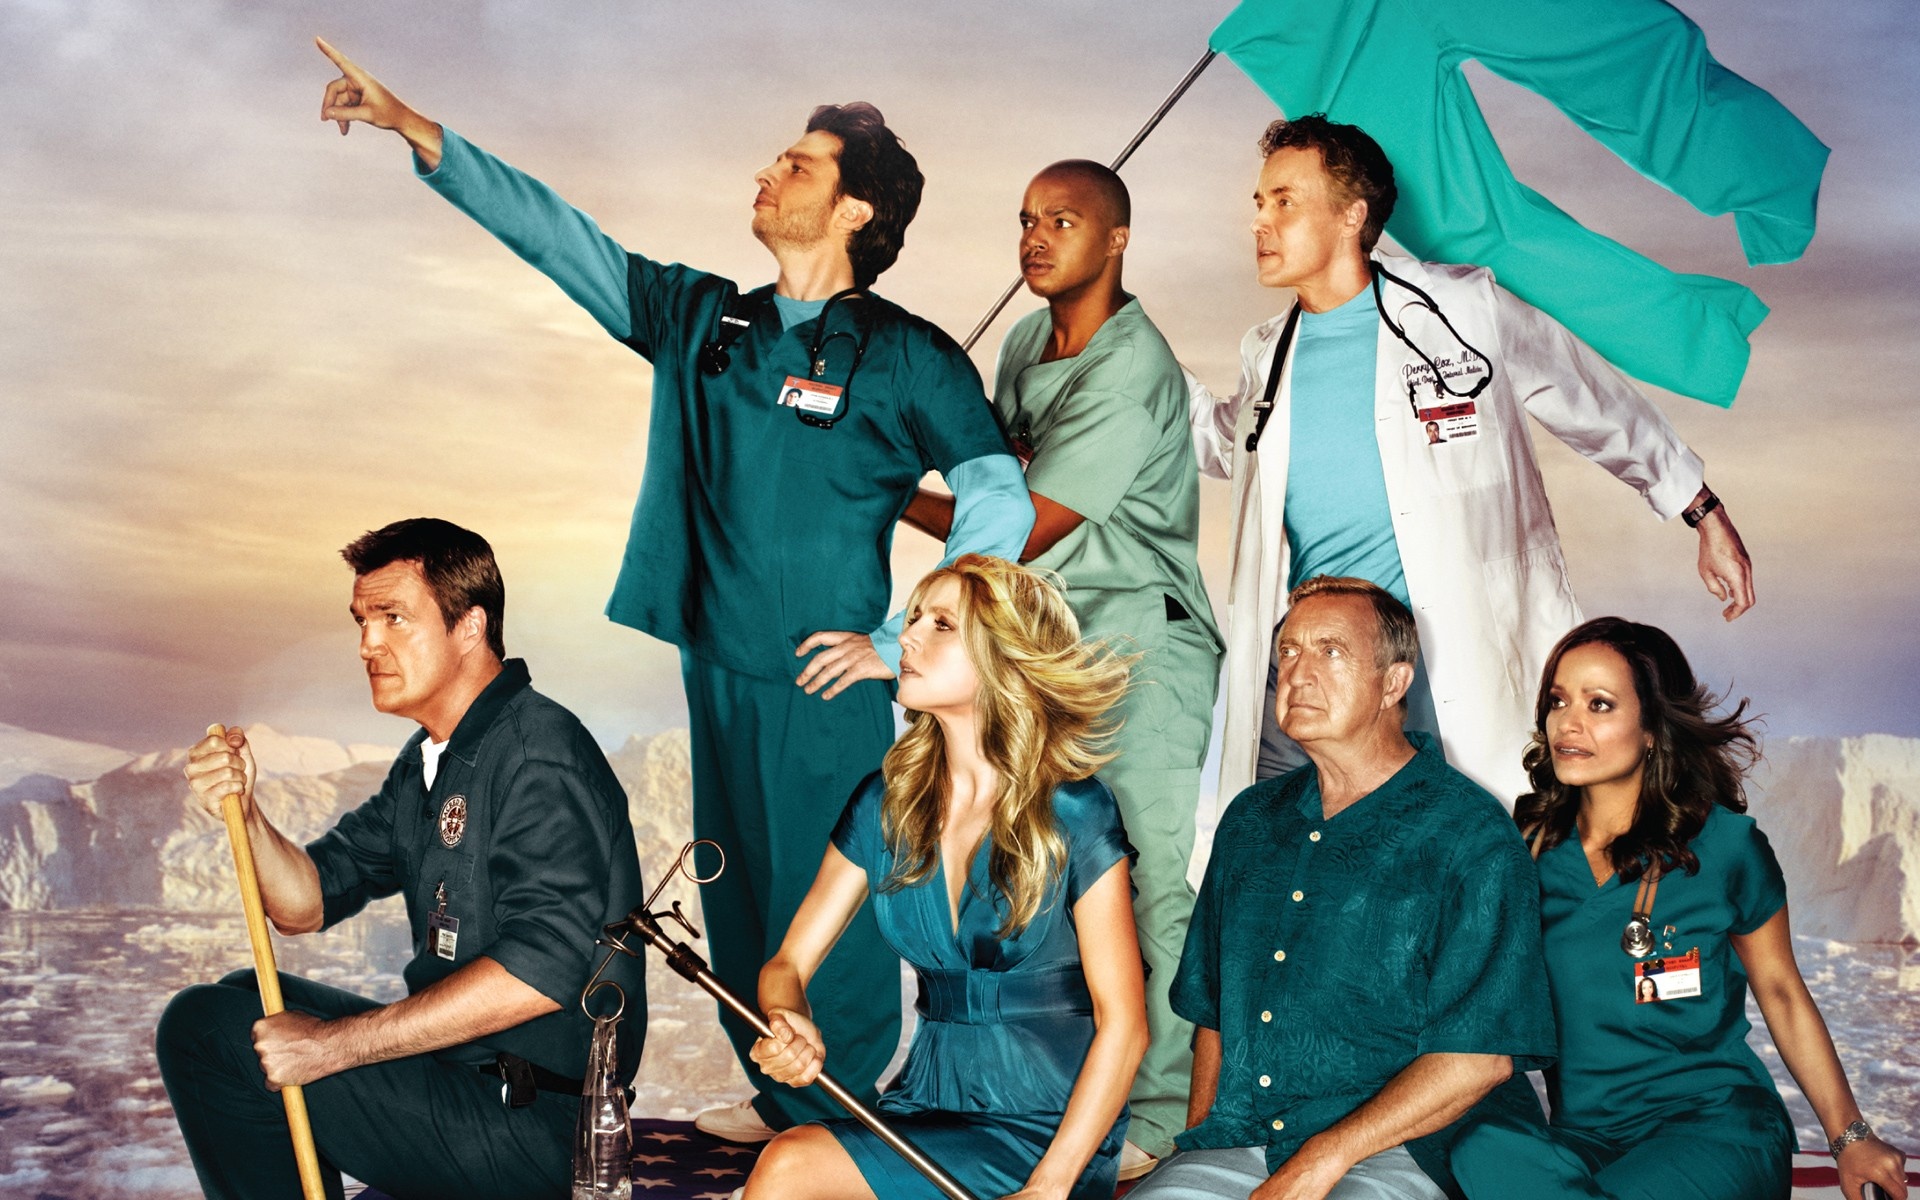 Donald Faison: The Janitor, Elliot Reid, Chris Turk, The leading characters in Scrubs. 1920x1200 HD Background.